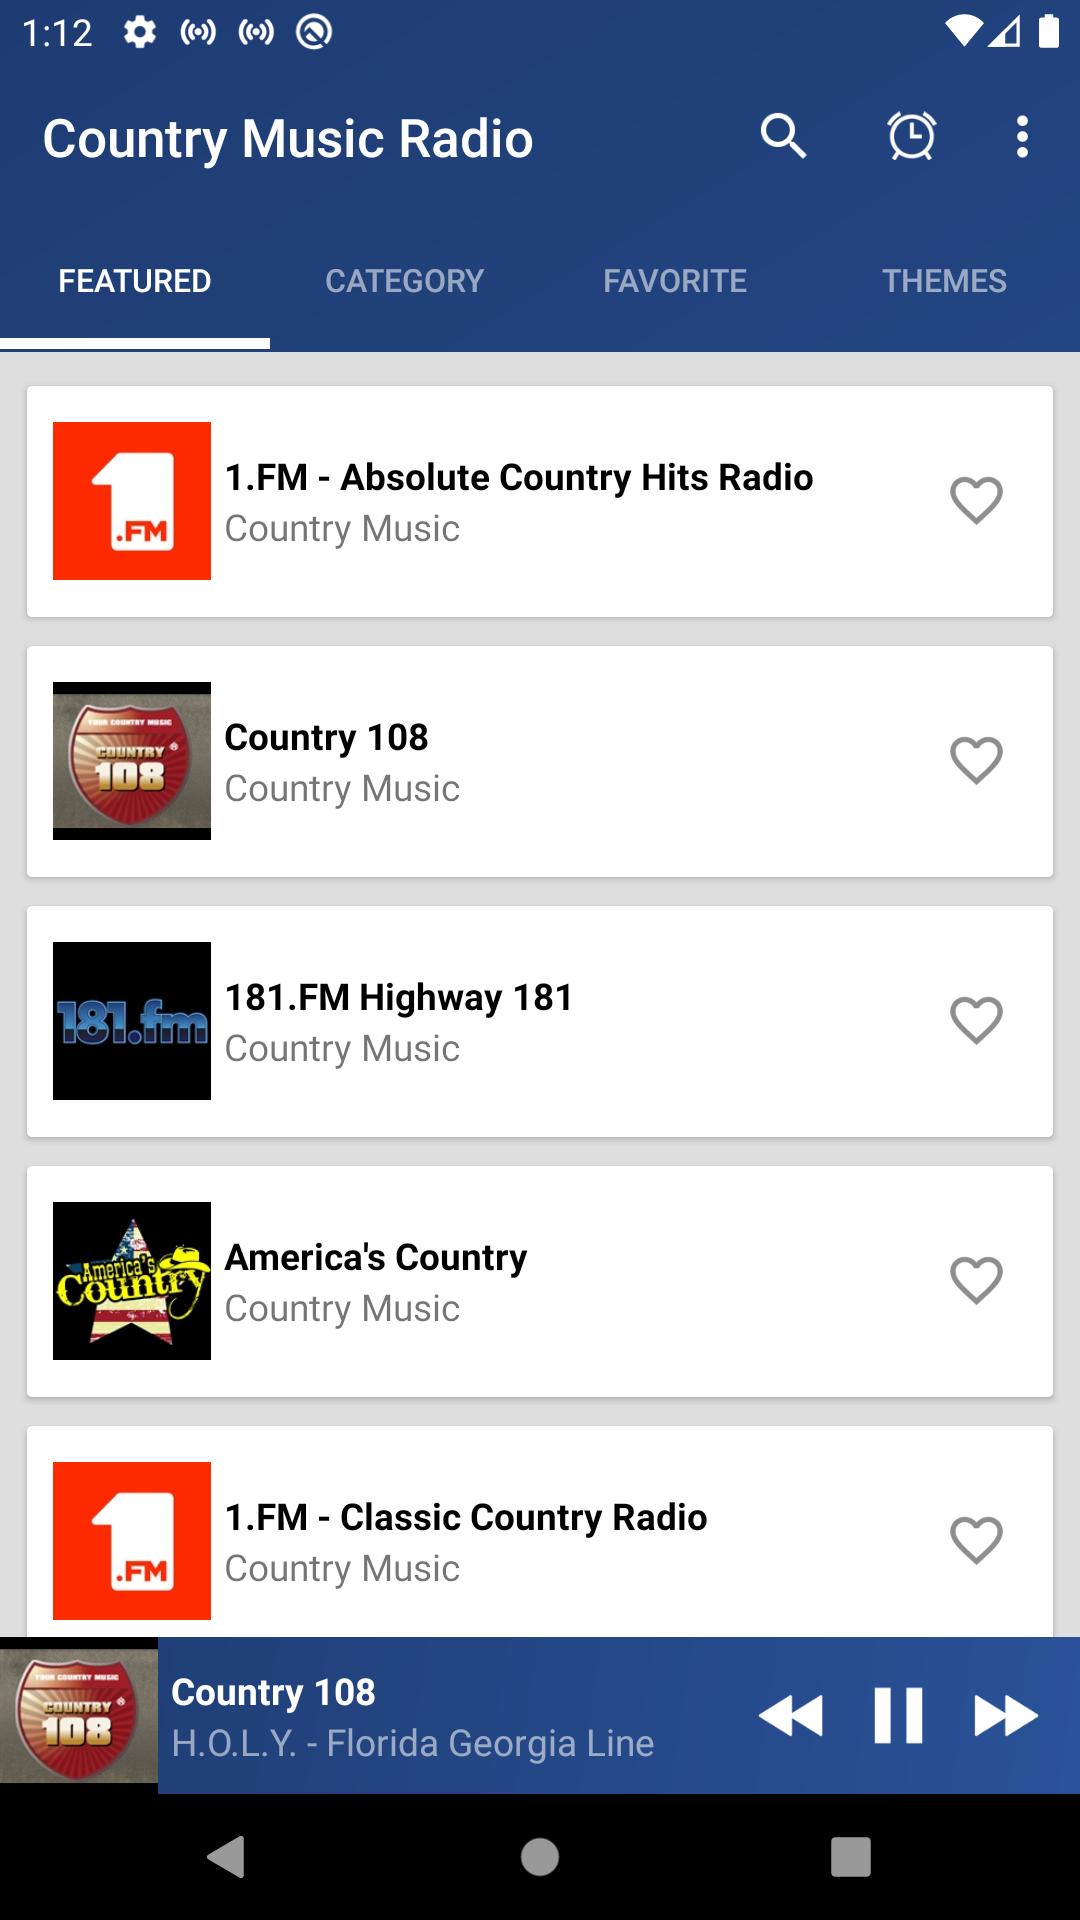 Country Music Radio 2020 for Android - APK Download